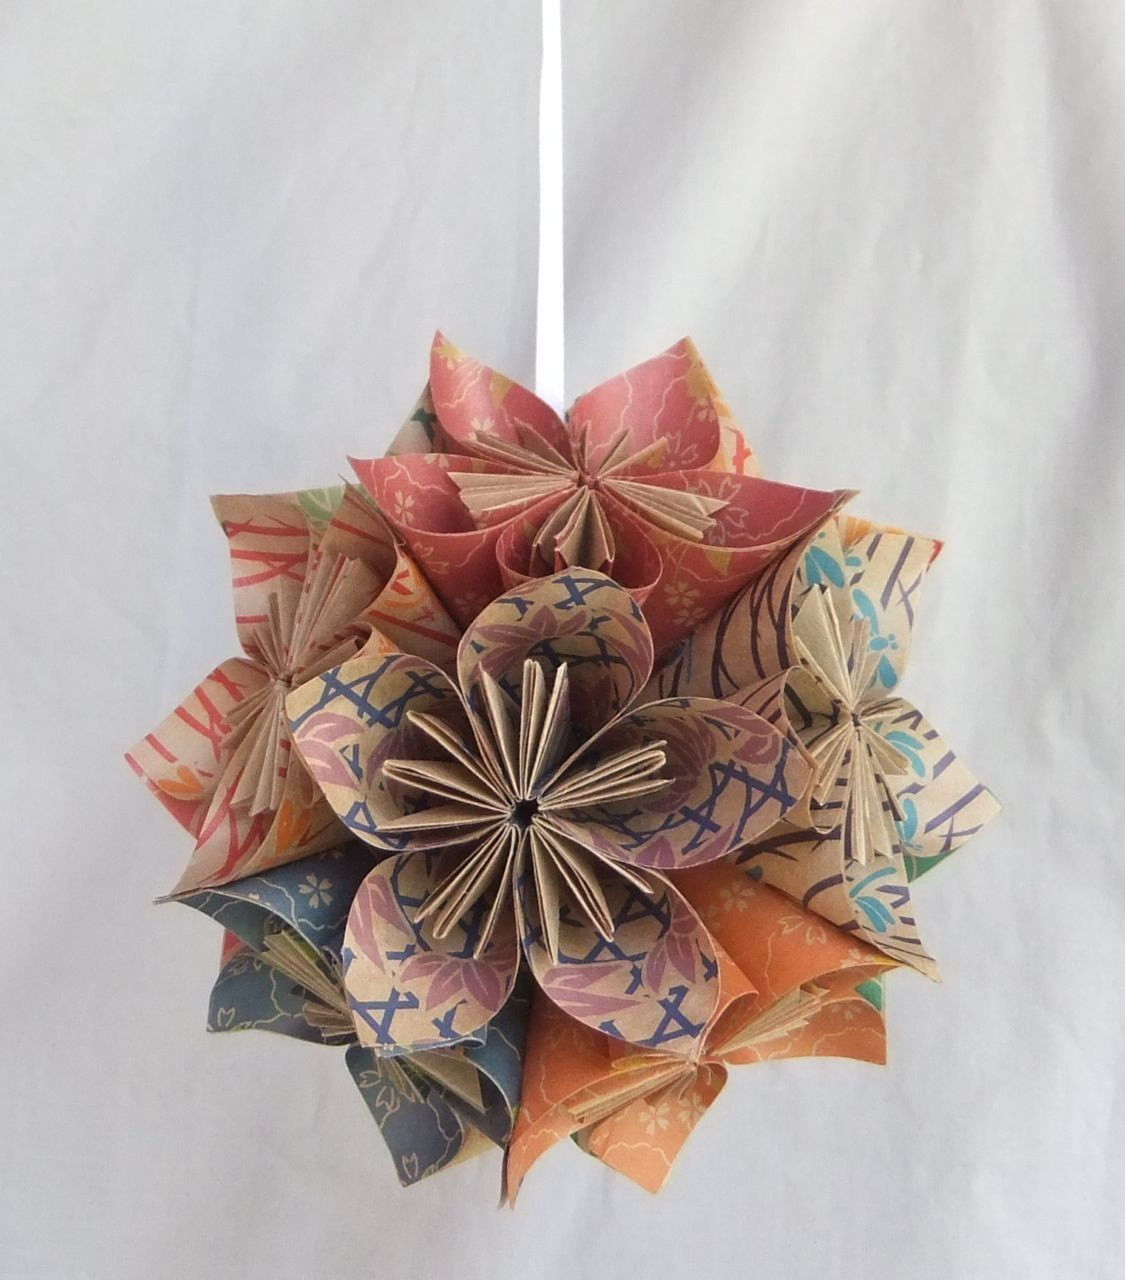 Flower Christmas Ornaments
 Origami Flower Ornament The Natural Christmas Tree